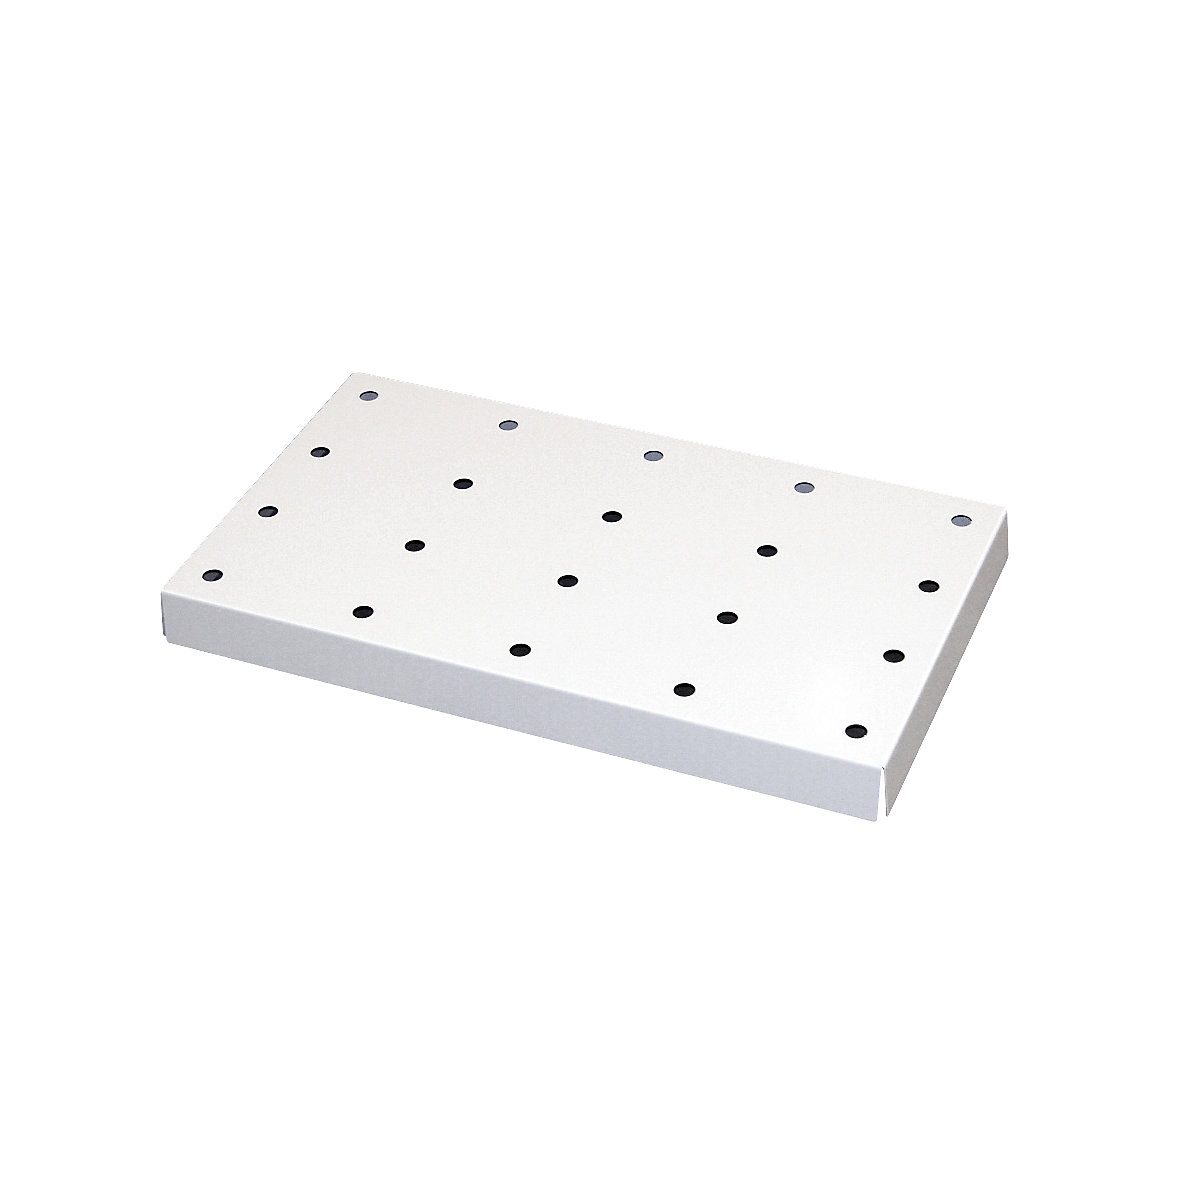 Perforated steel insert – asecos